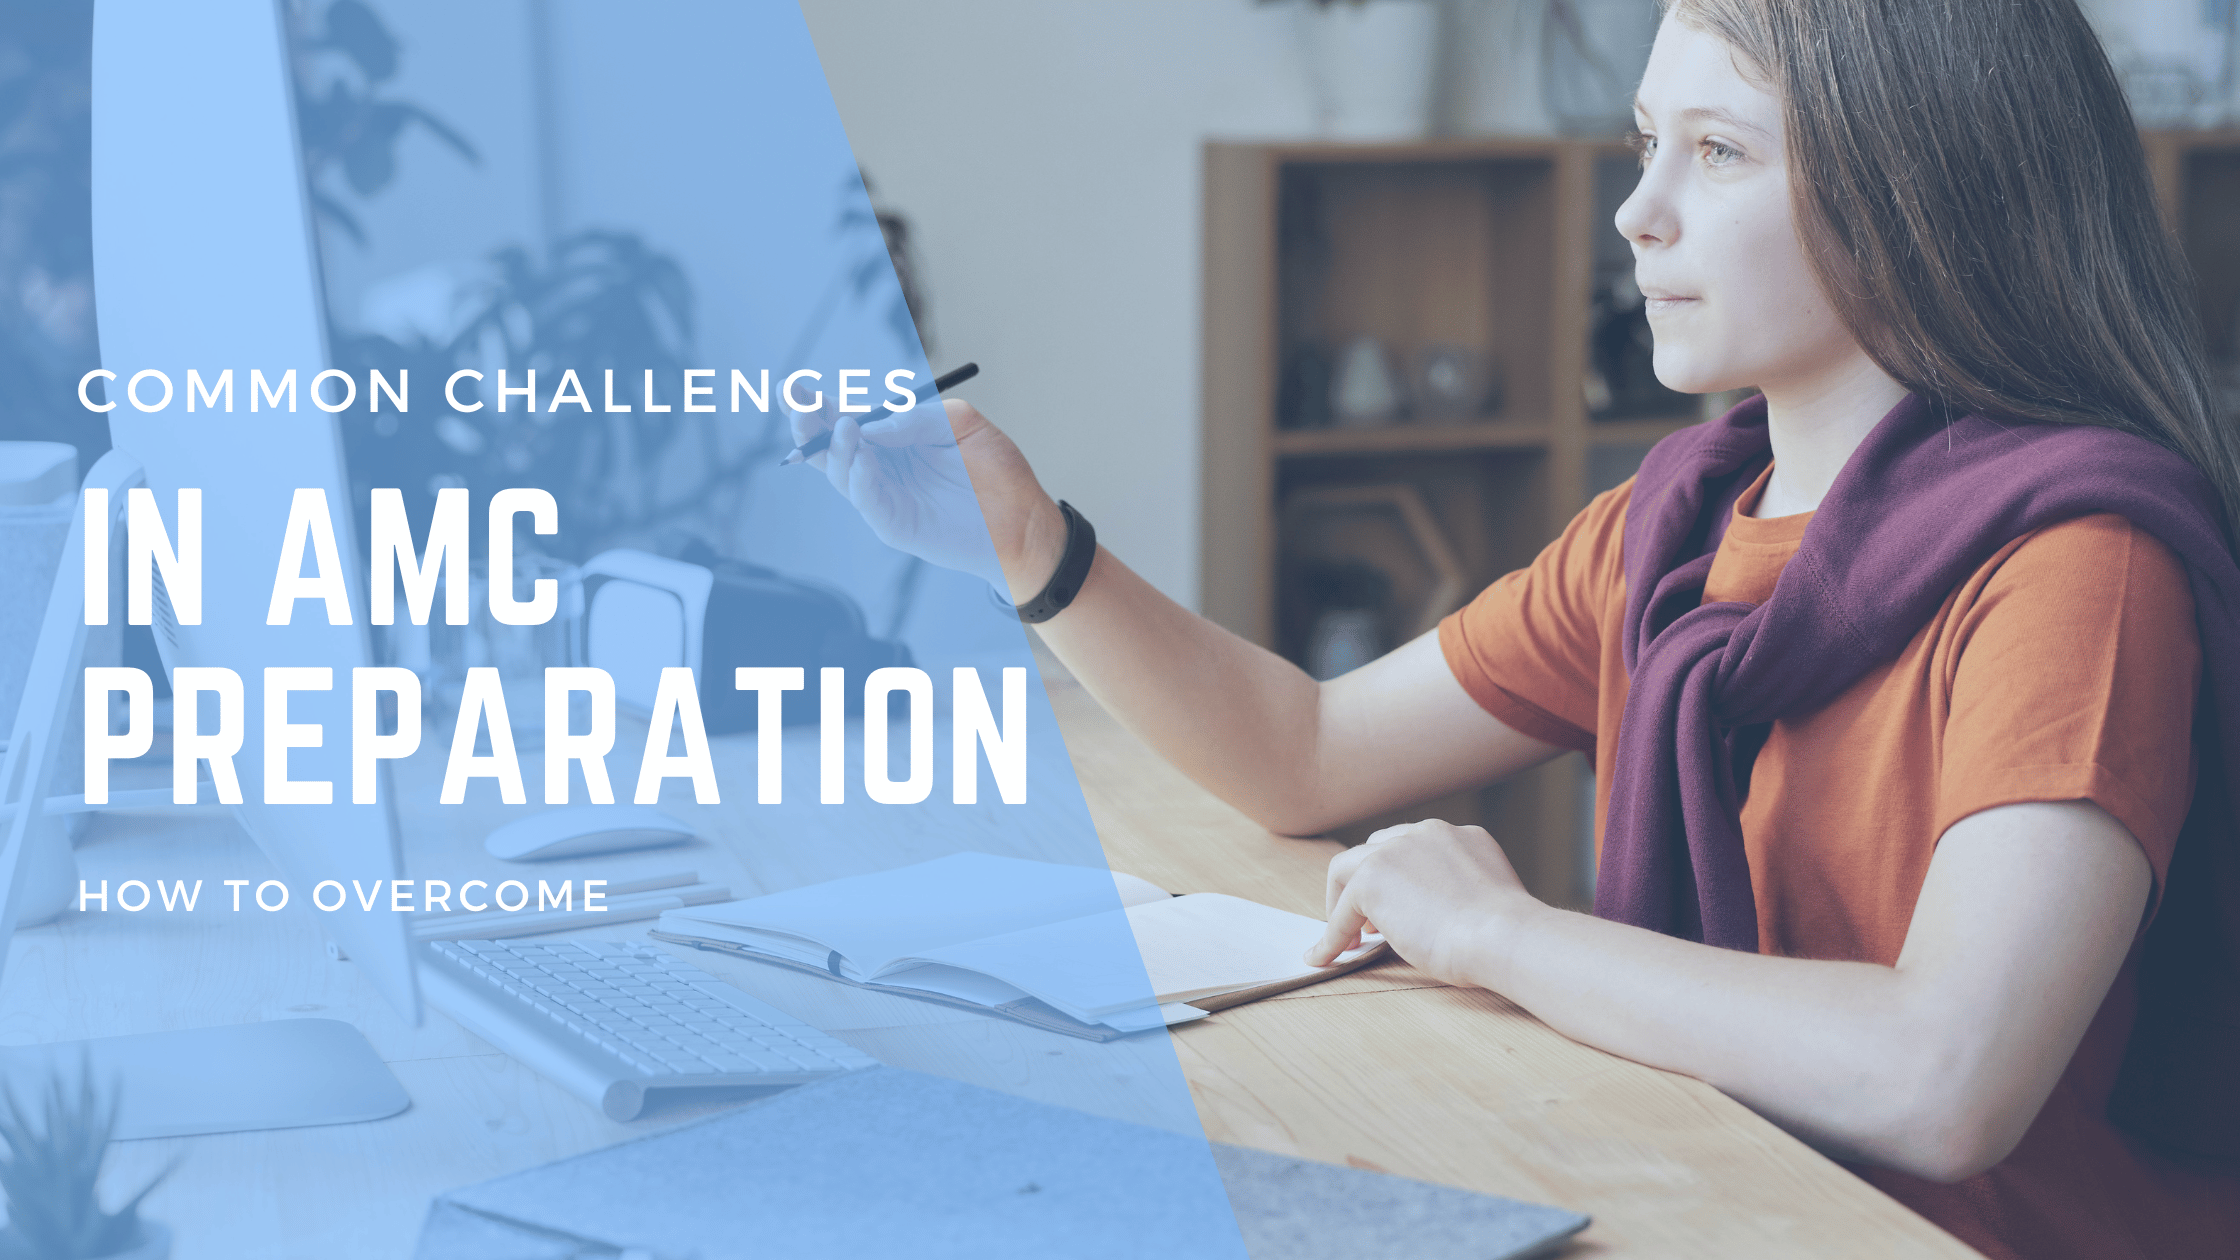 How to Overcome Common Challenges in AMC Preparation